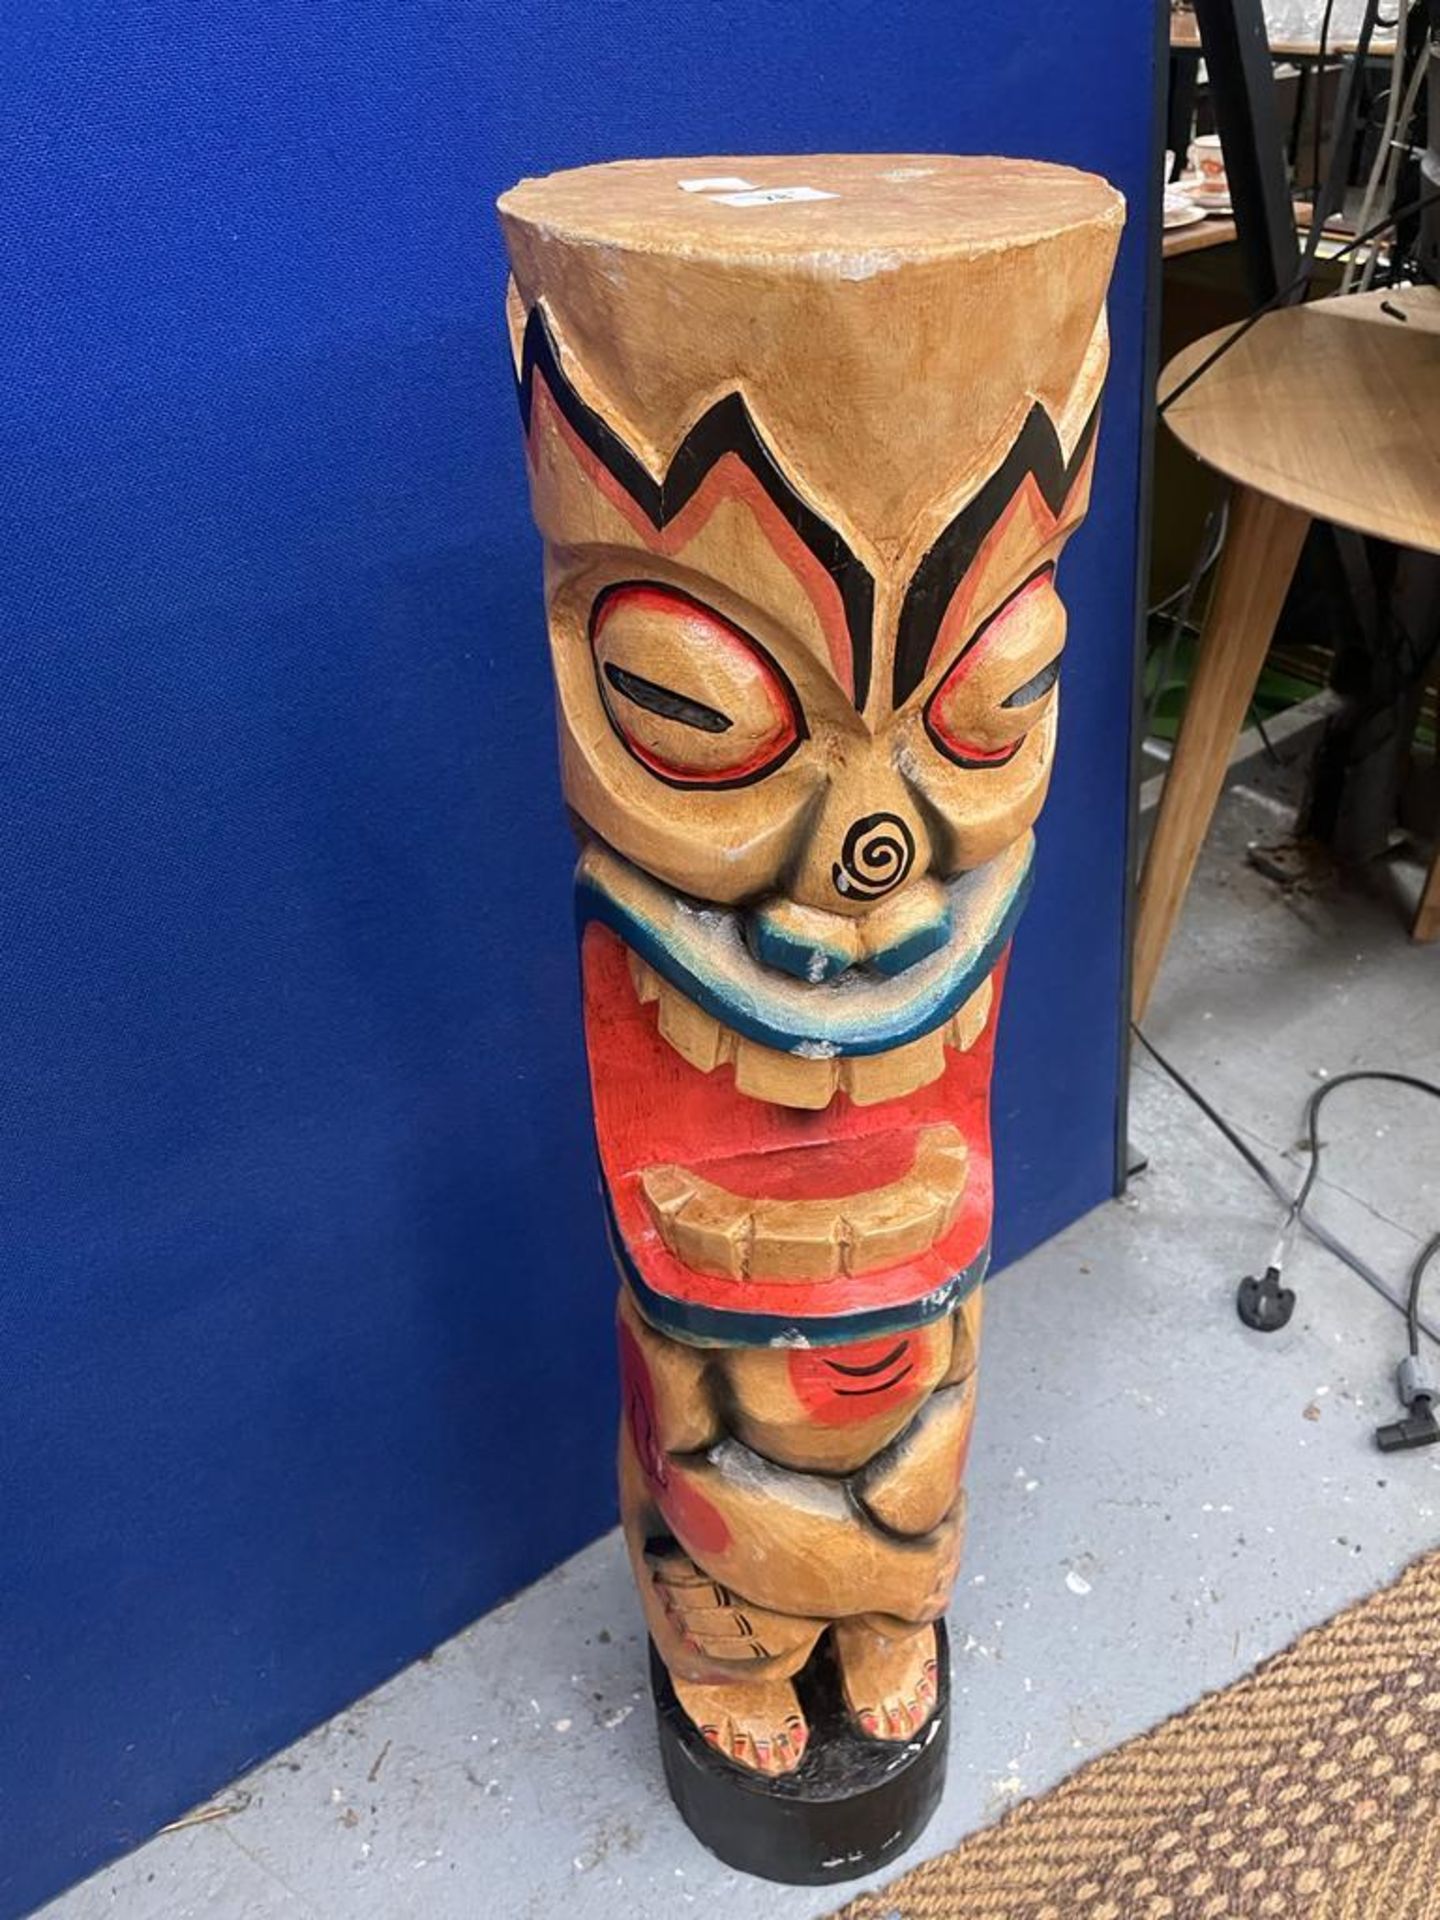 A LARGE WOODEN TIKI STATUE - Image 2 of 2